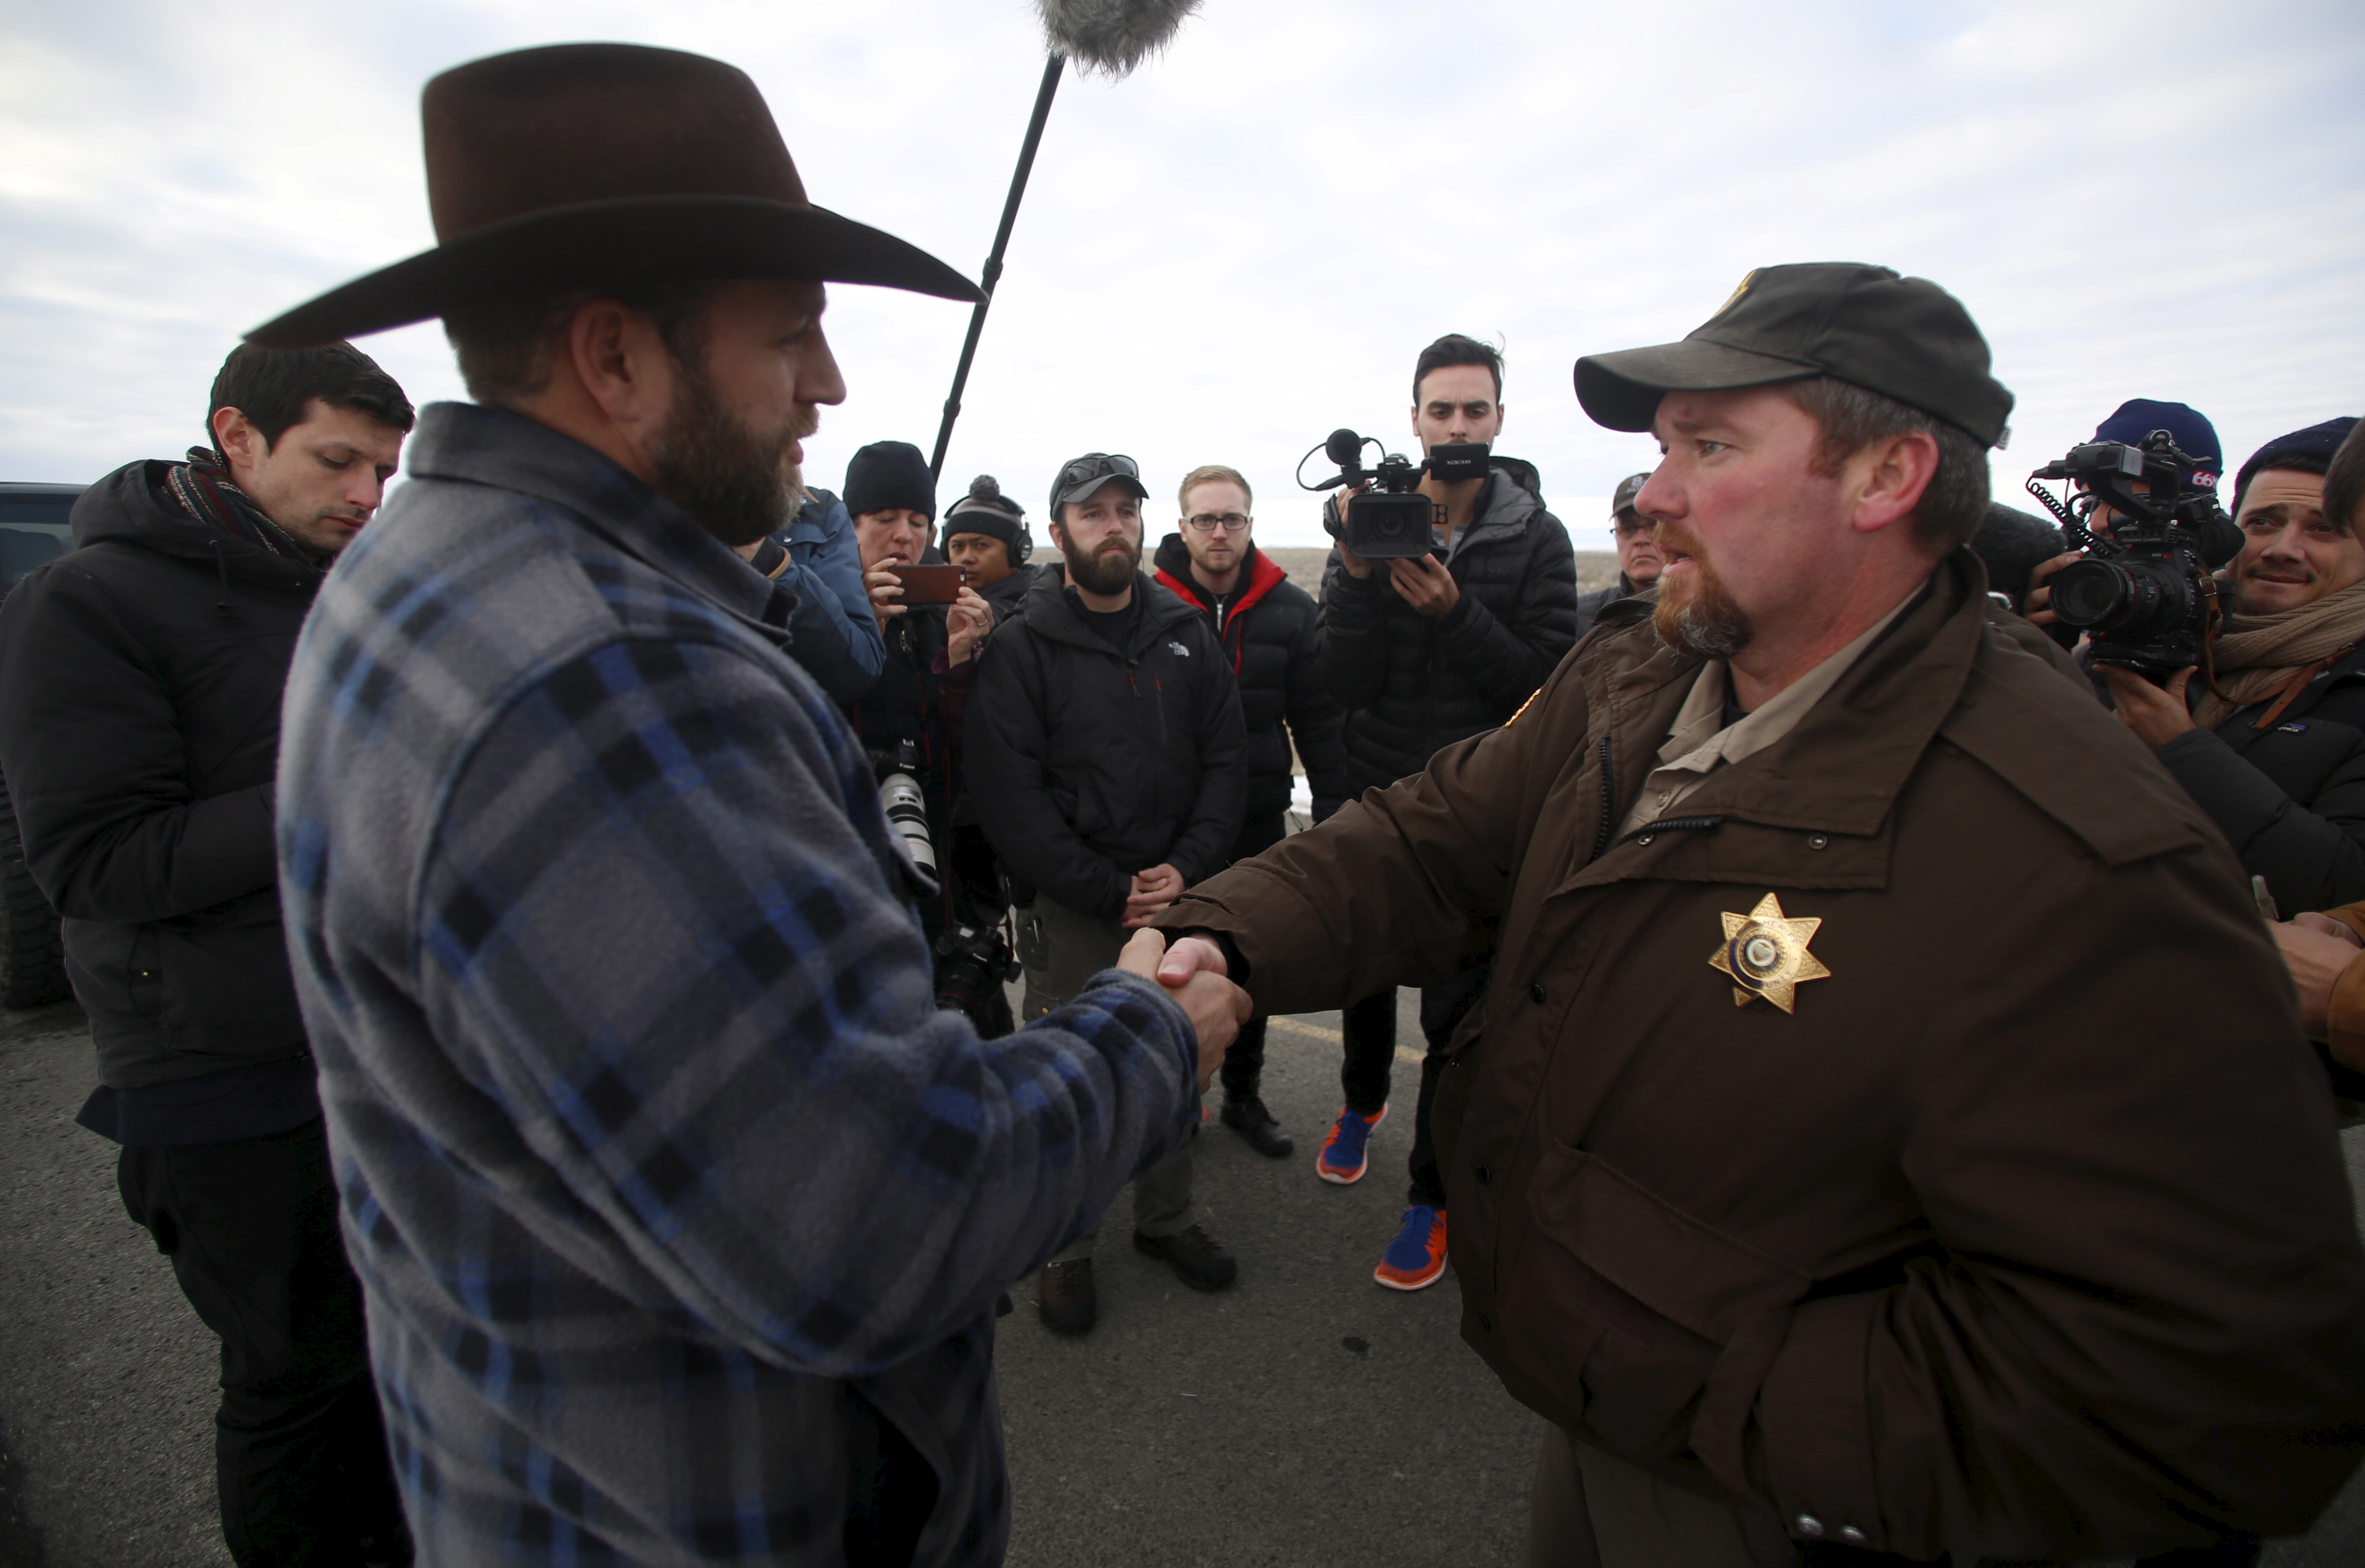 Ammon Bundy meets with Harney County Sheriff David Ward along a road south of the Malheur National Wildlife Refuge near Burns, Oregon